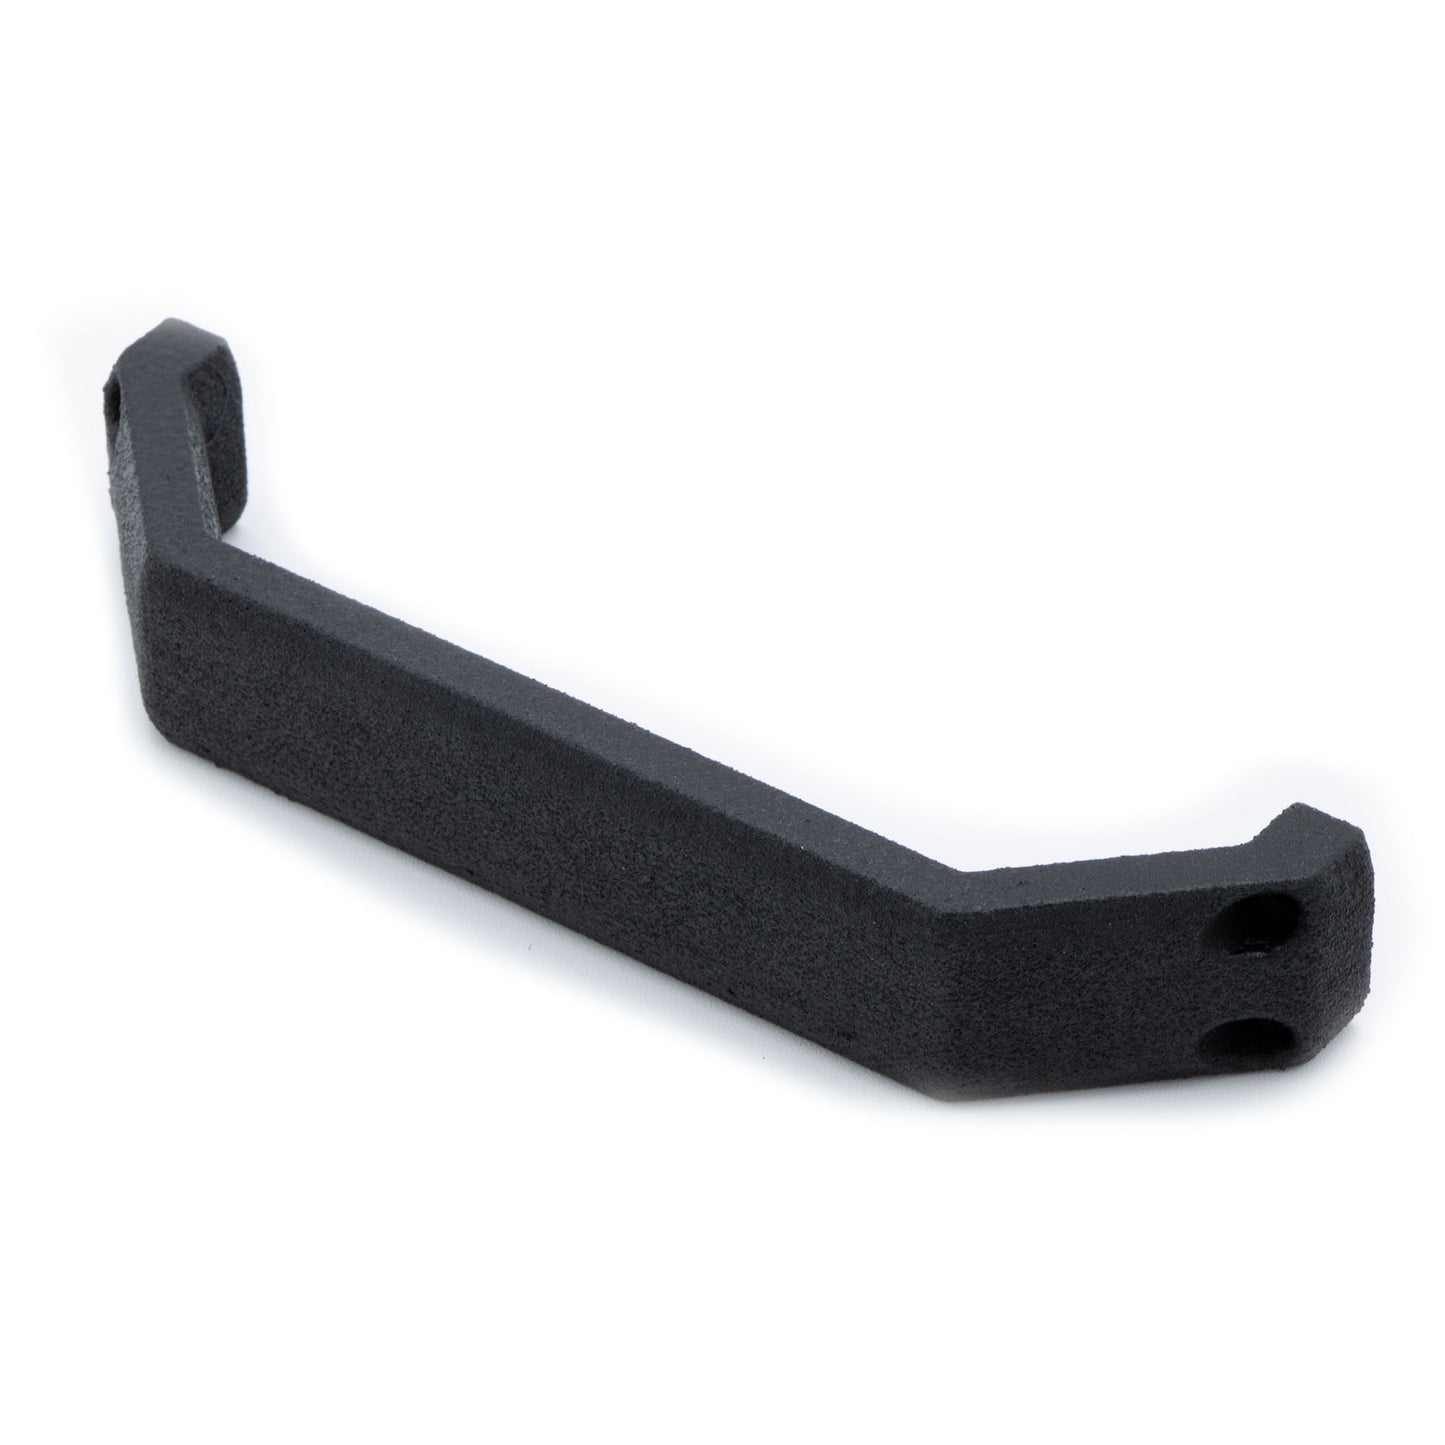 Handle Replacement - Fits All Marten & Mink Inspection Crawlers